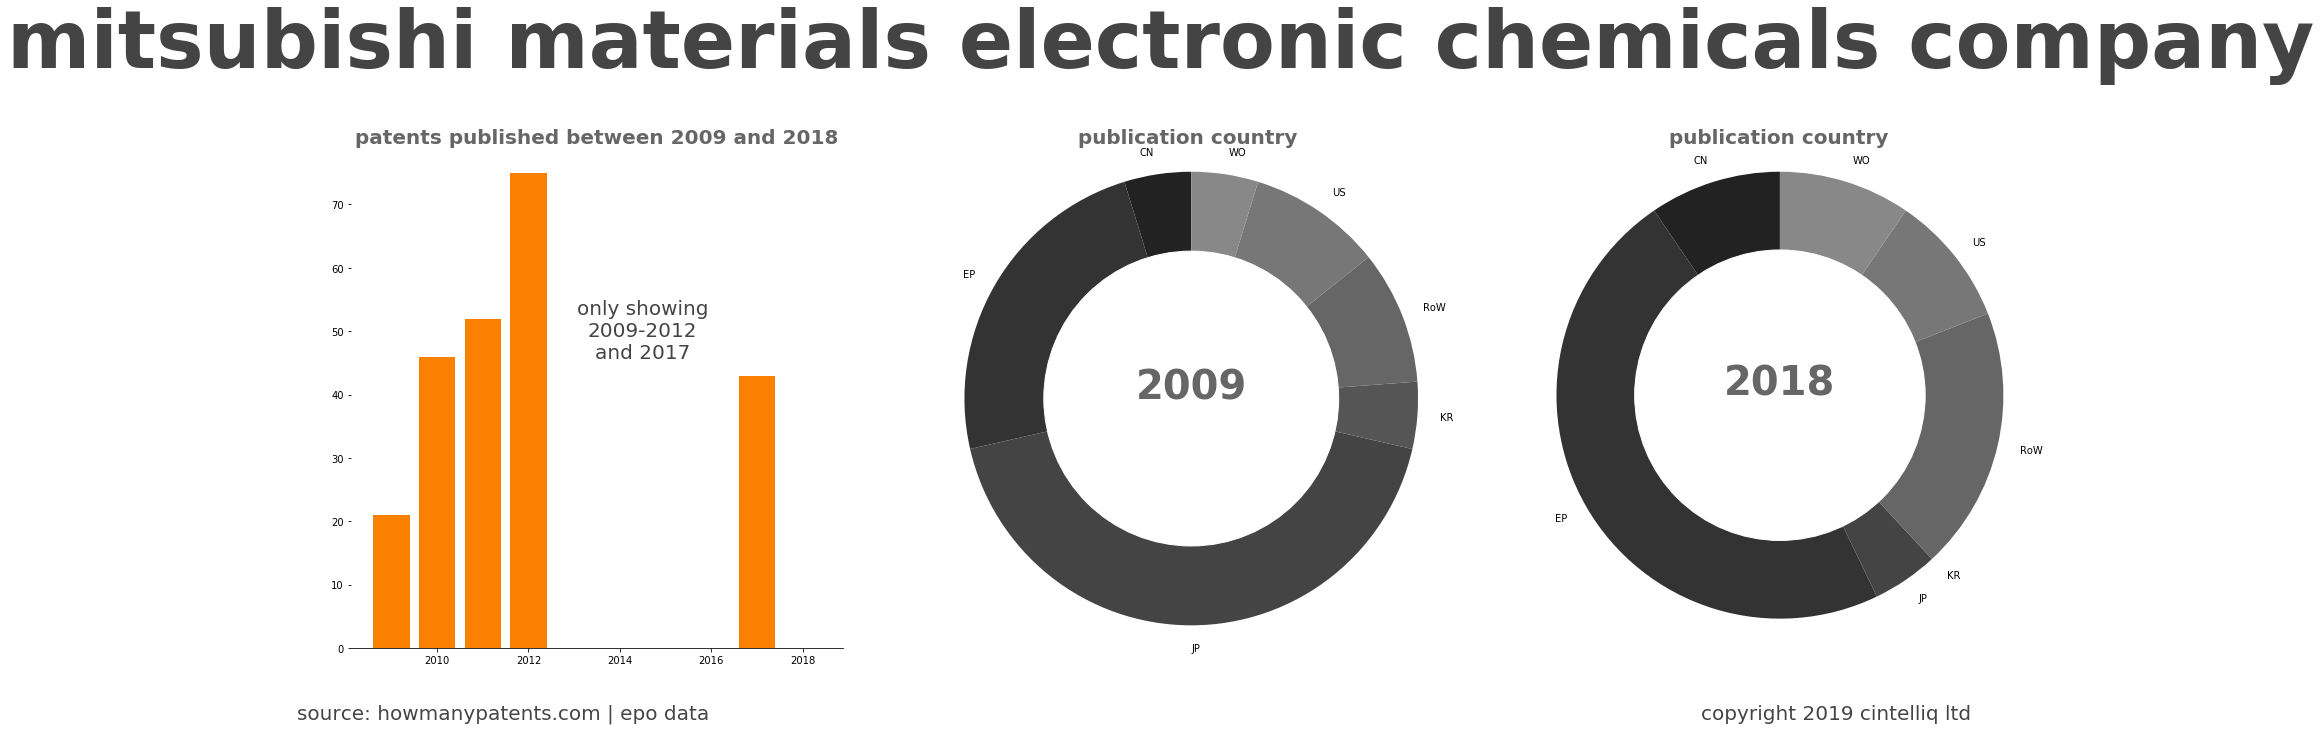 summary of patents for Mitsubishi Materials Electronic Chemicals Company